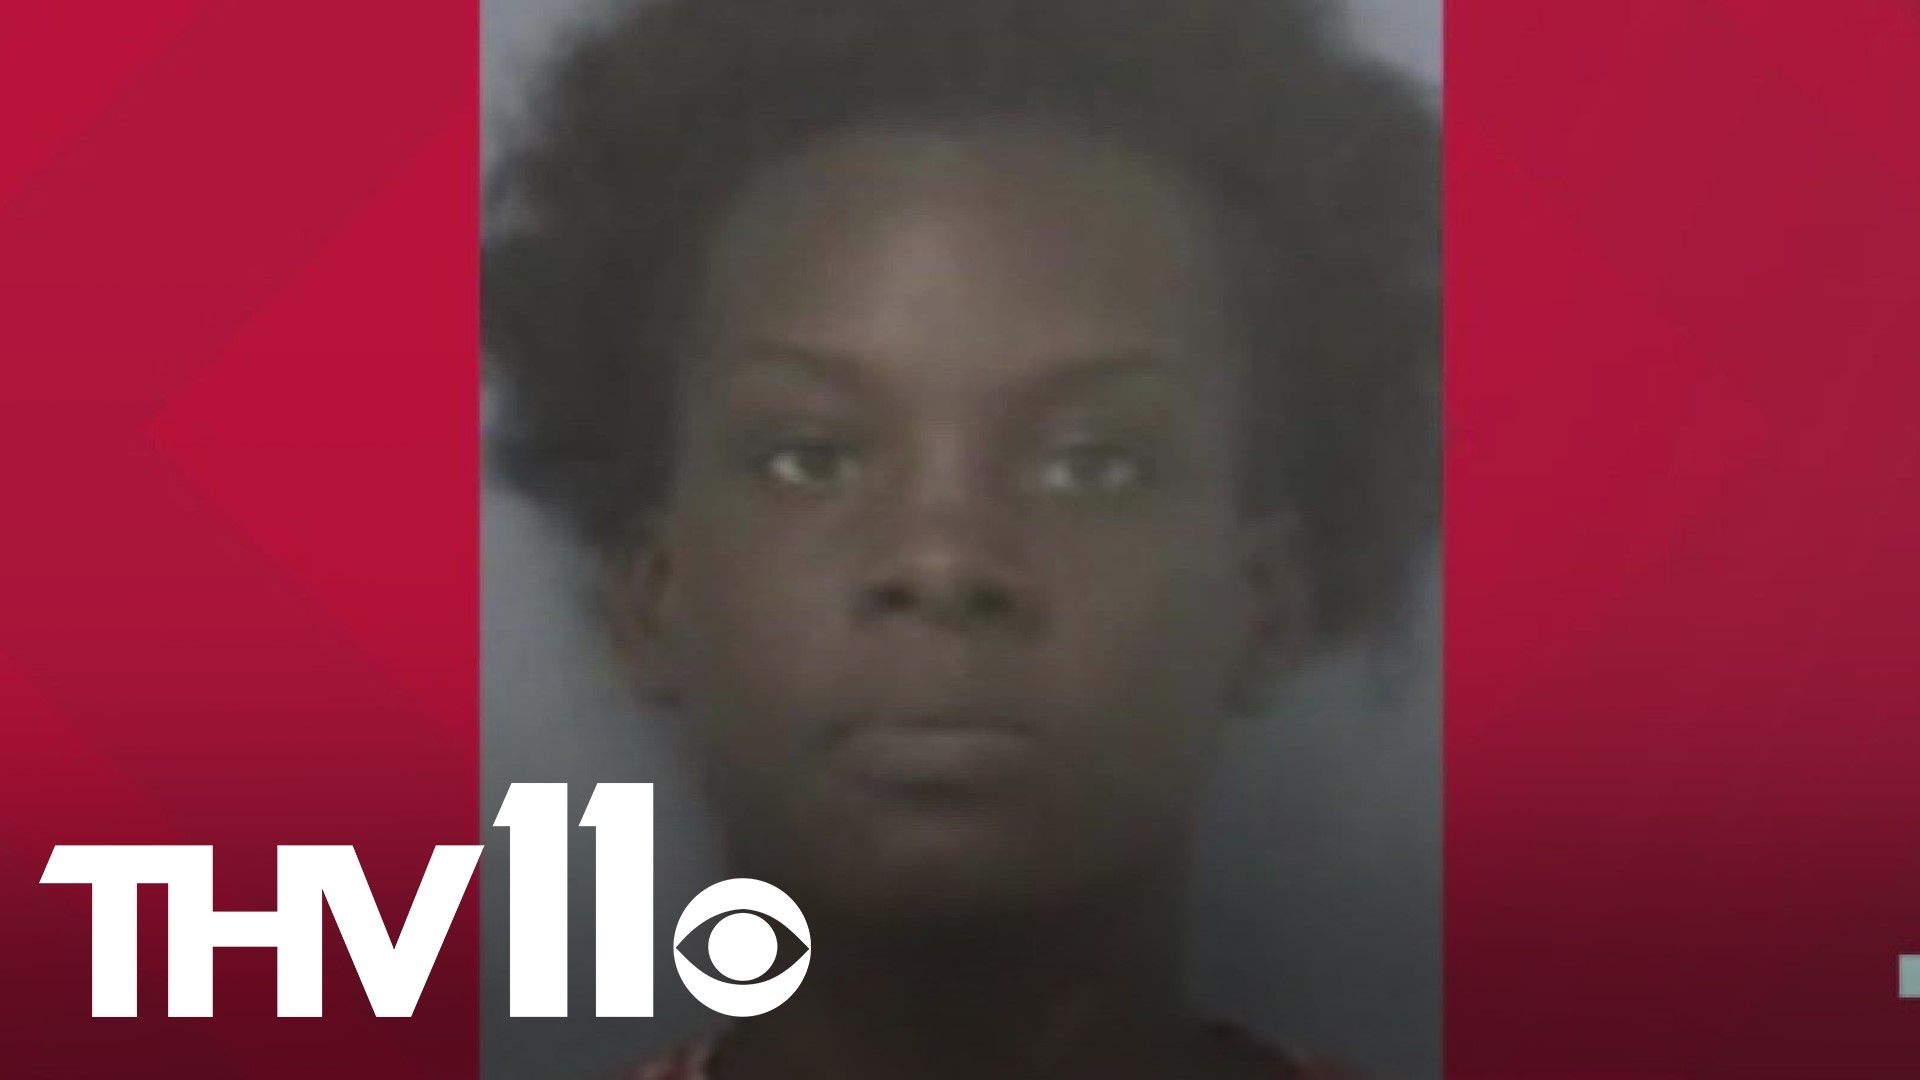 A 24-year-old woman has been arrested and accused of killing an 8-year-old boy in Marion, Arkansas.